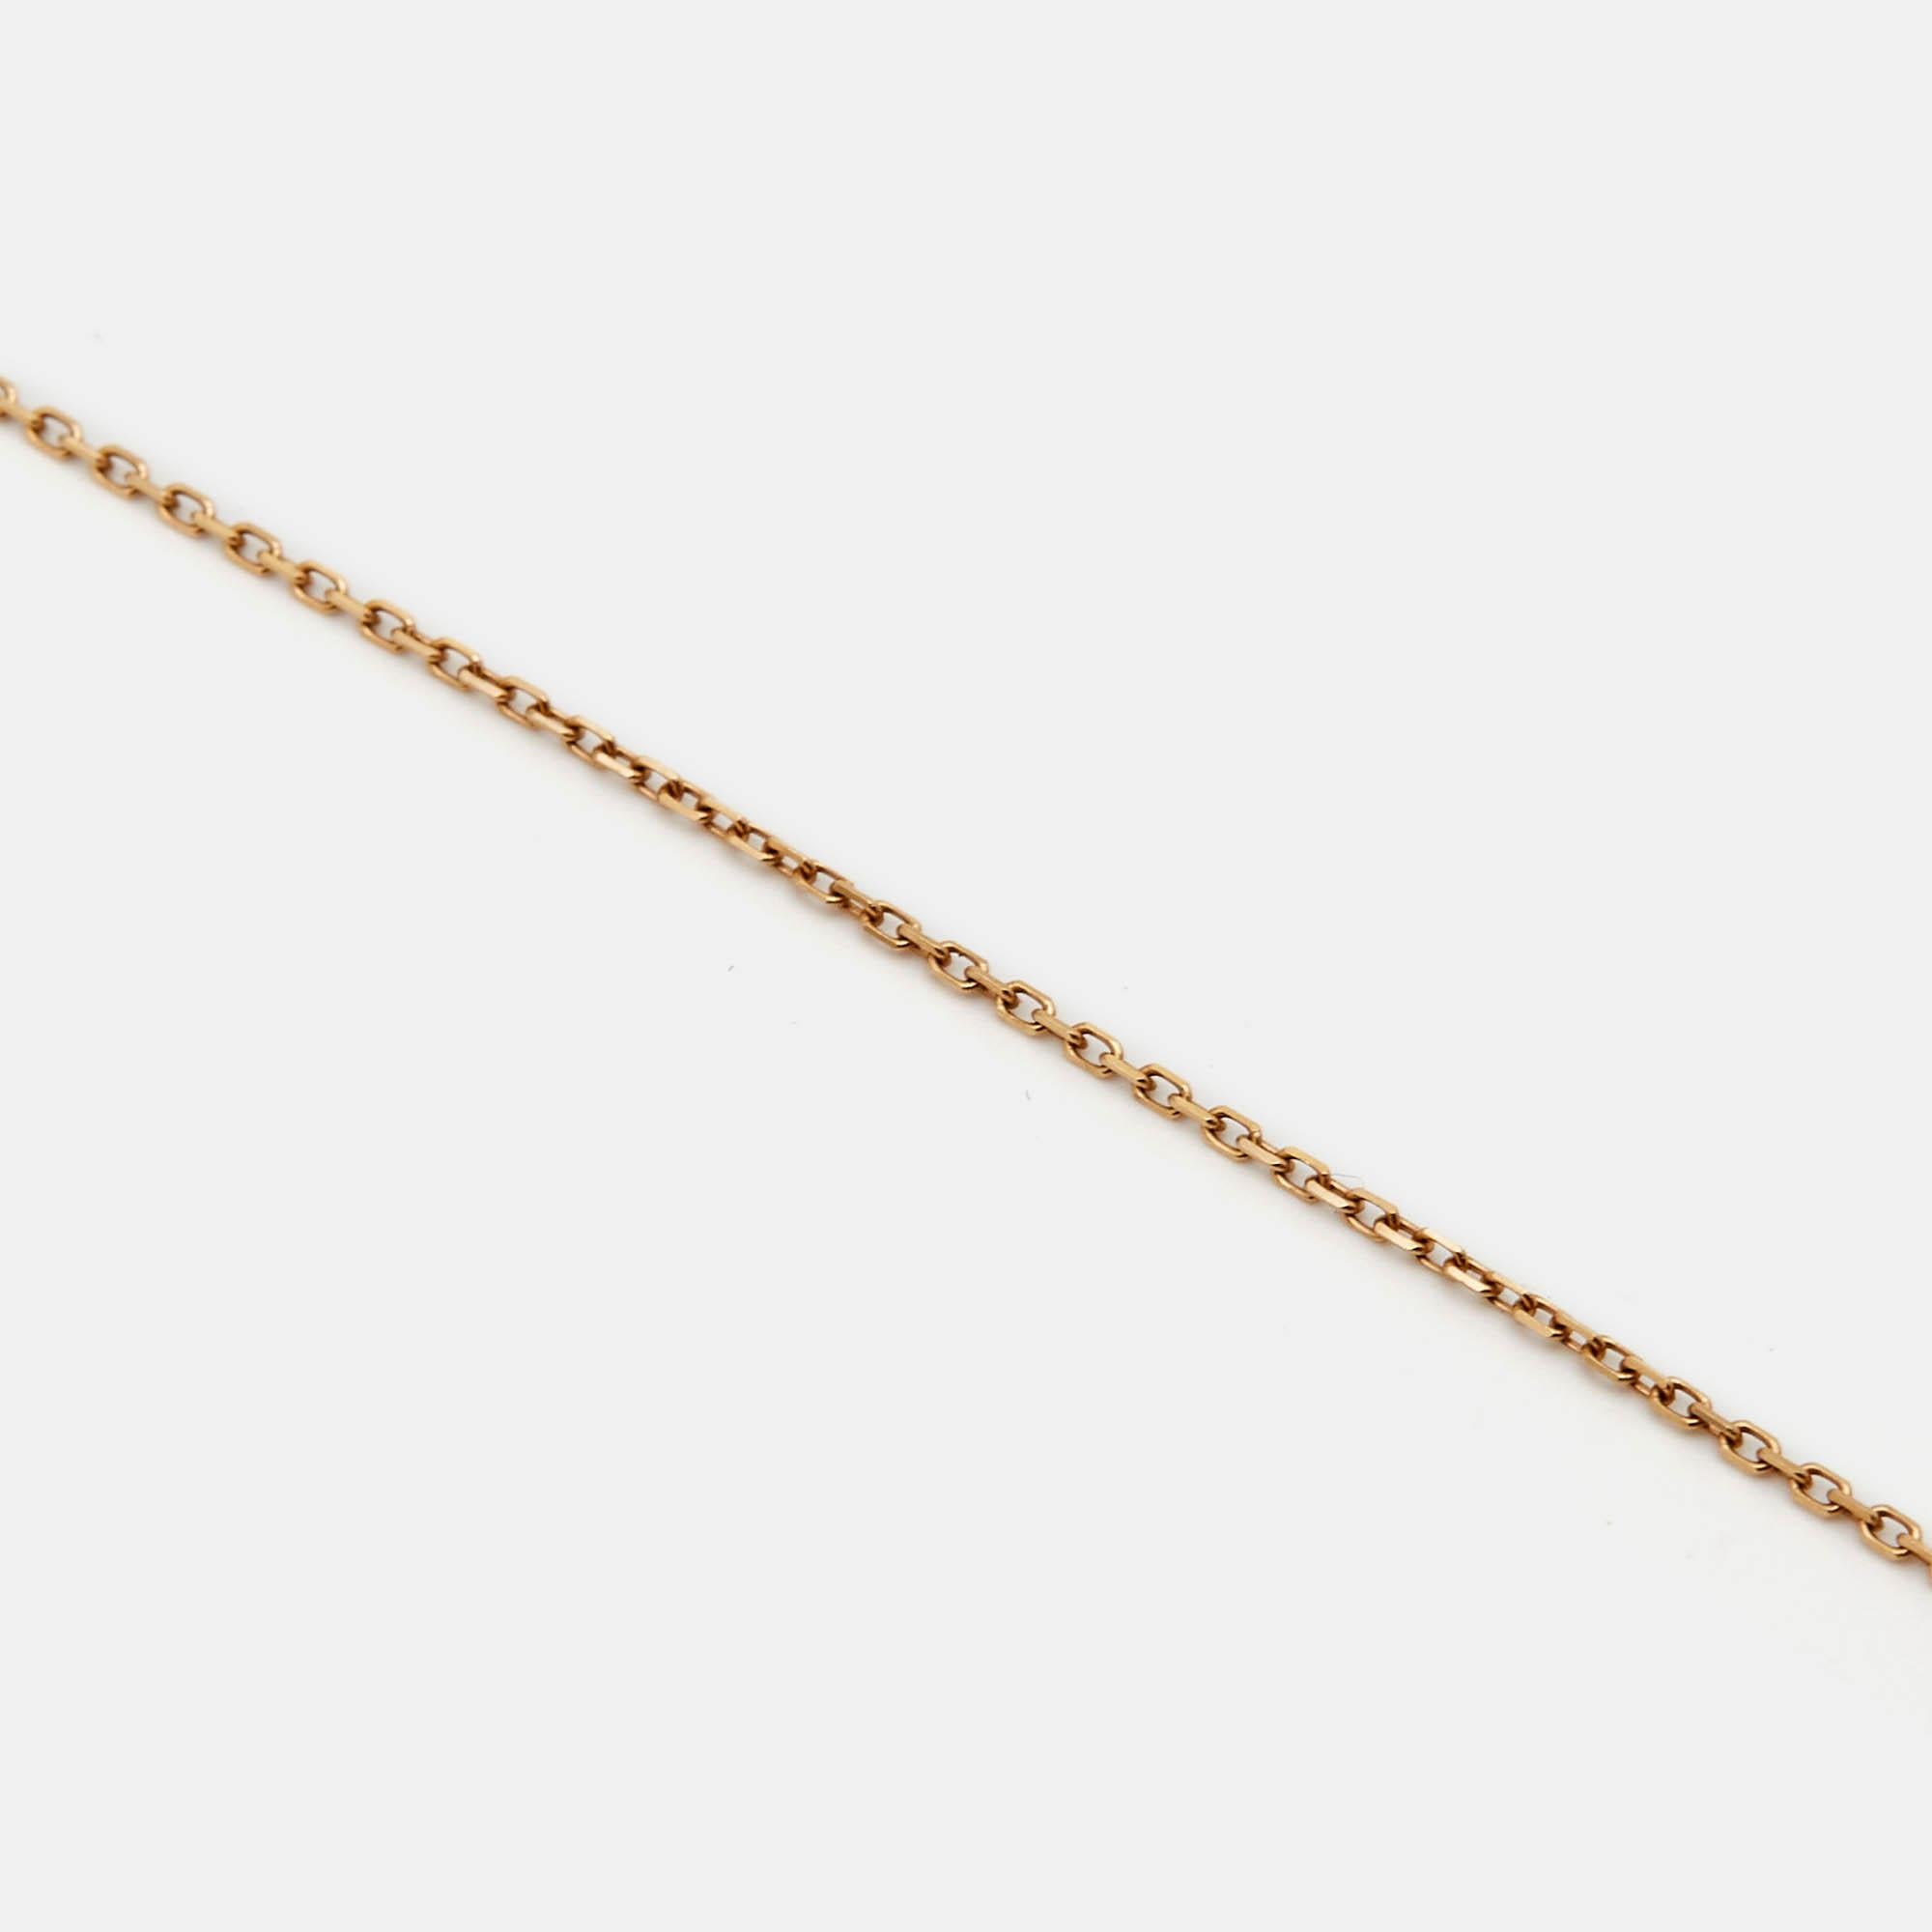 This Amulette de Cartier necklace is subtly elegant as well as beautifully luxurious. Constructed in 18K rose gold, this necklace features a disc charm inlaid with malachite and punctuated with a single diamond.

Includes
Original Case